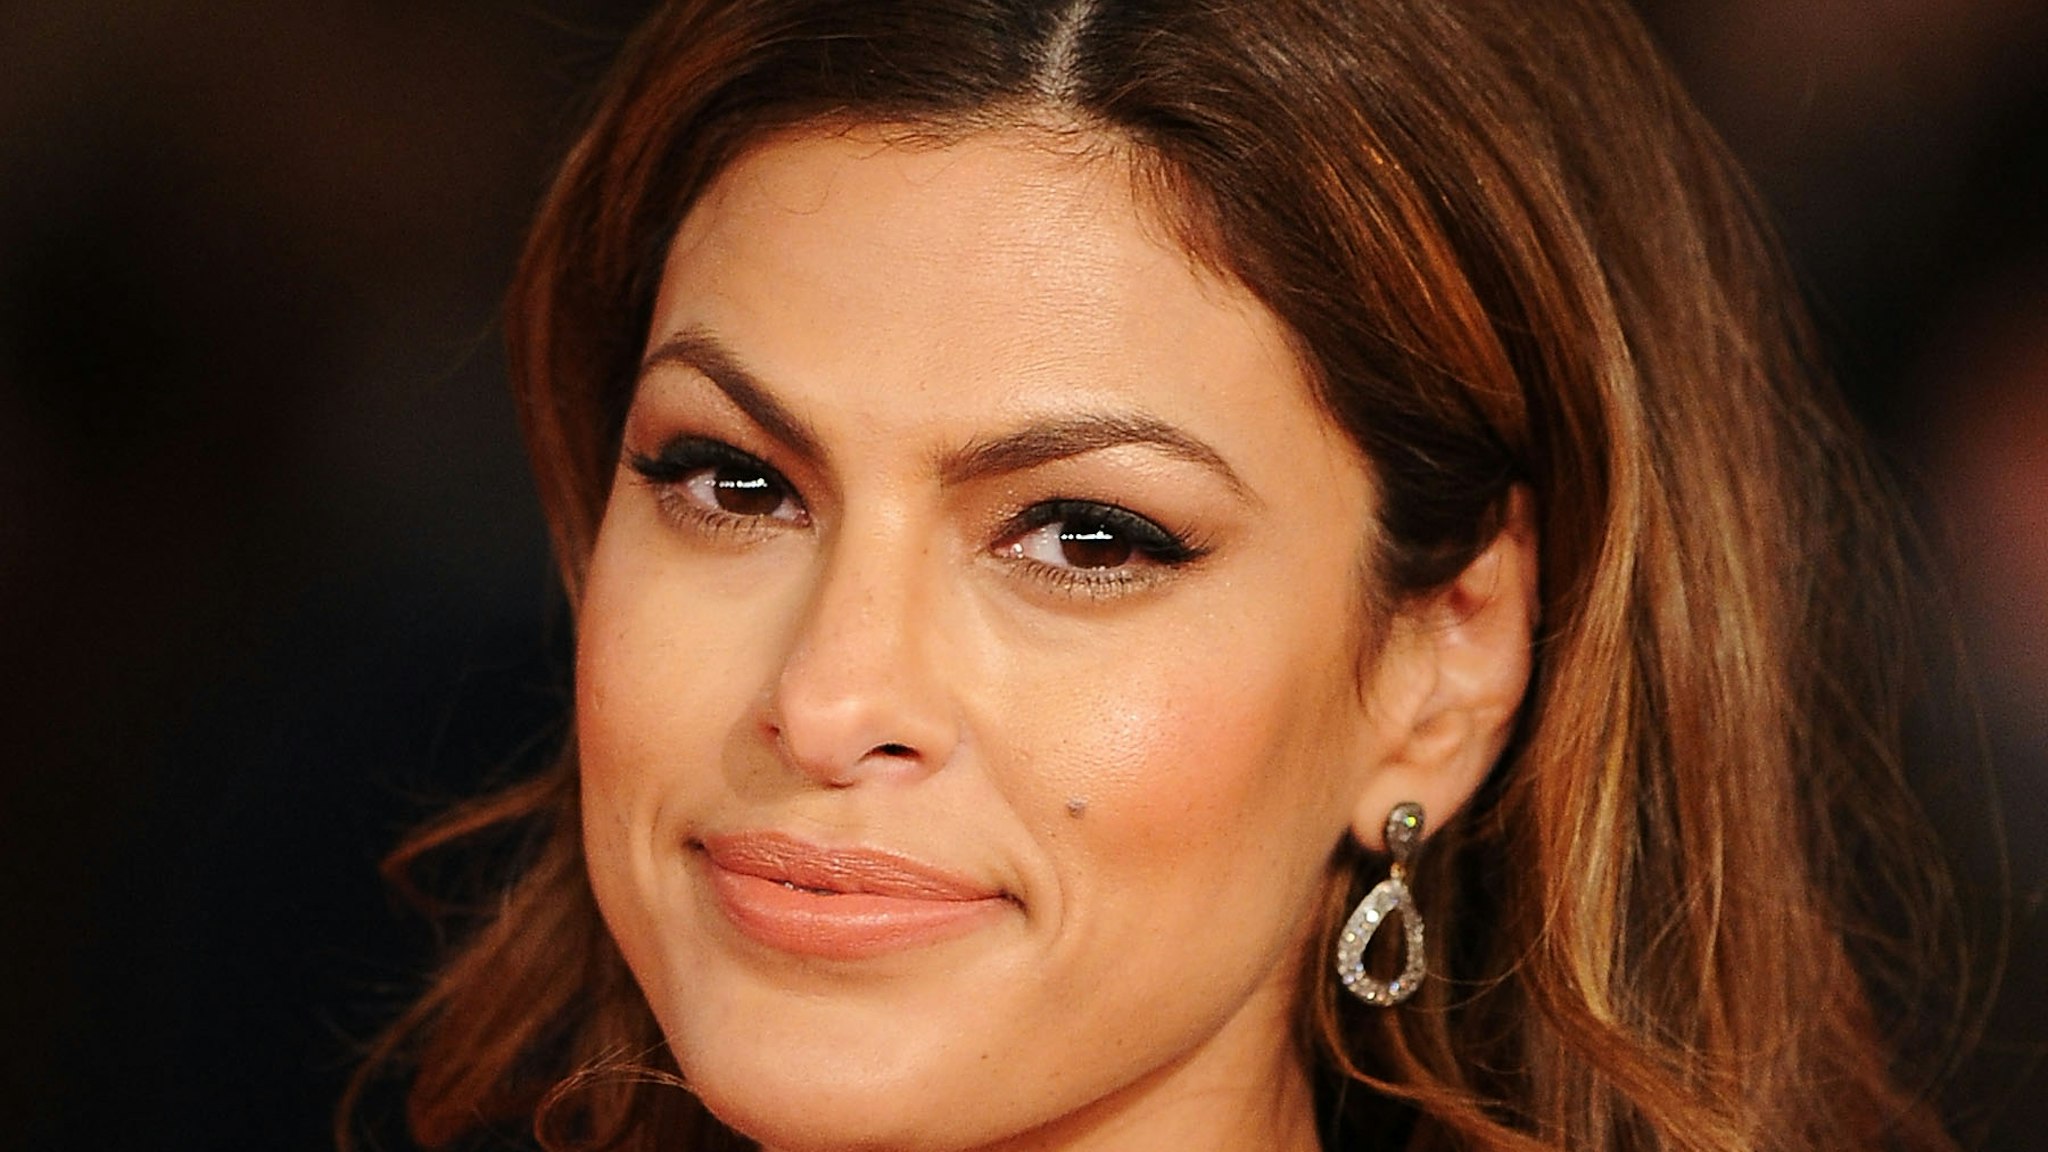 Actress Eva Mendes attends the "La dolce vita" world restoration premiere during The 5th International Rome Film Festival at Auditorium Parco Della Musica on October 30, 2010 in Rome, Italy.